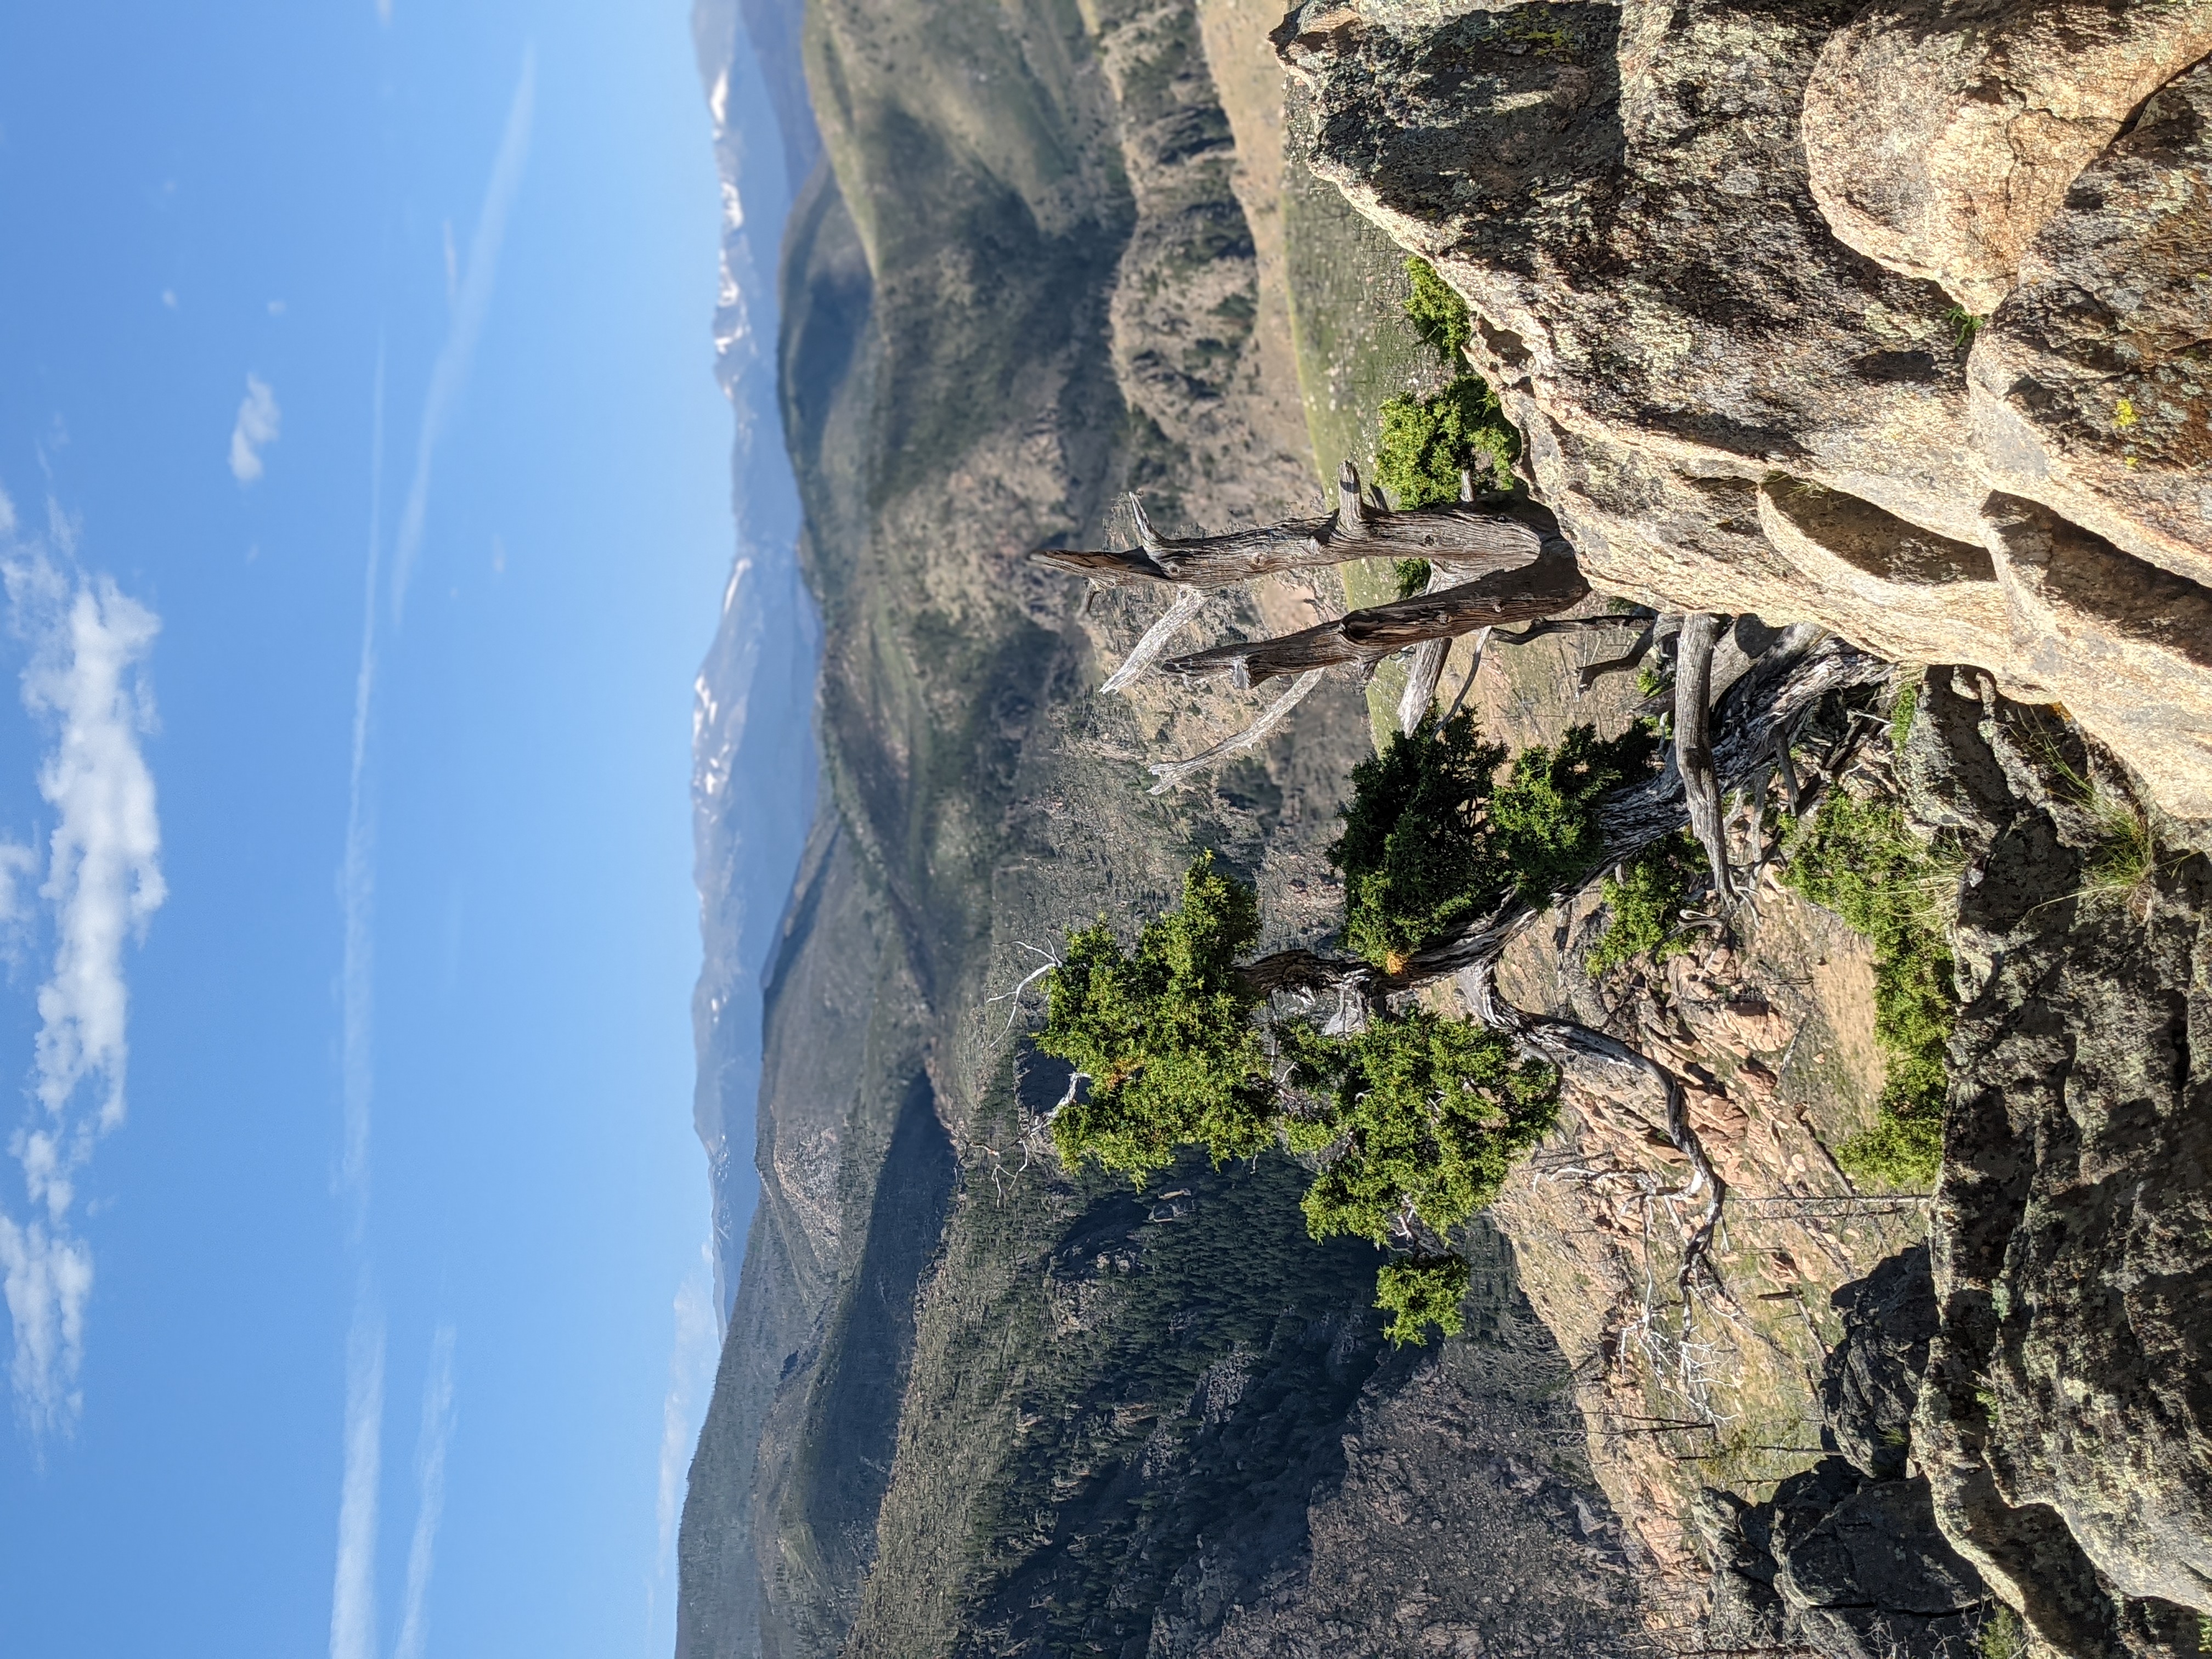 View from the Summit of Mt. McConnell in the Cache La Poudre Wilderness Area.